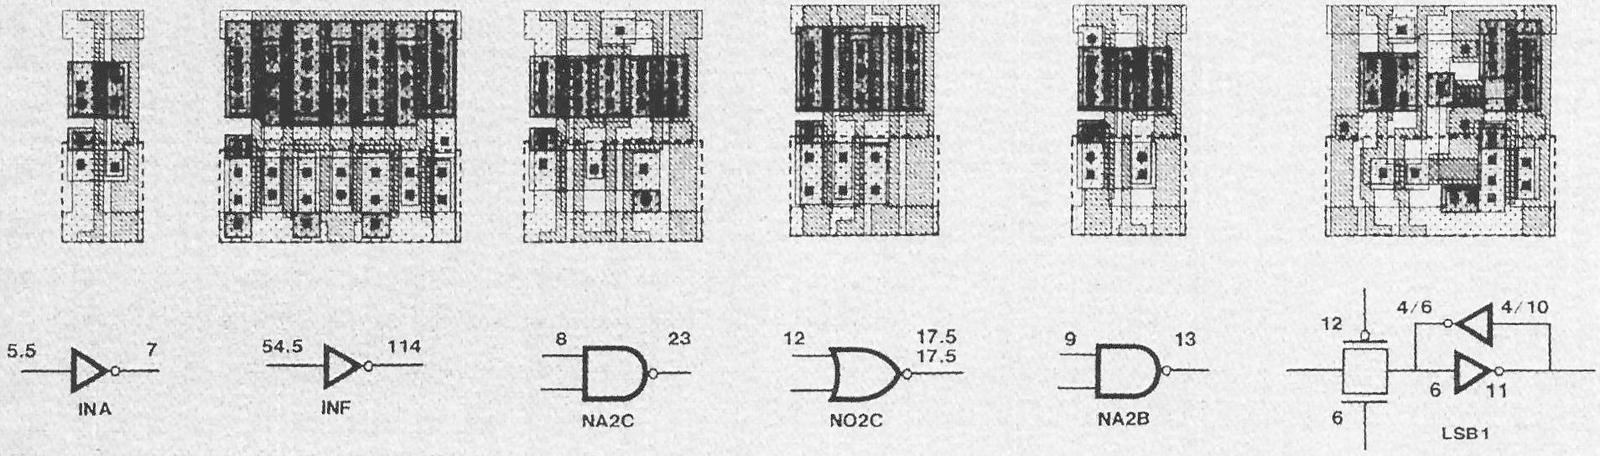 Examples of standard cells, from APR386. The numbers are not defined but may indicate input and output capacitance. (Click for a larger version.)